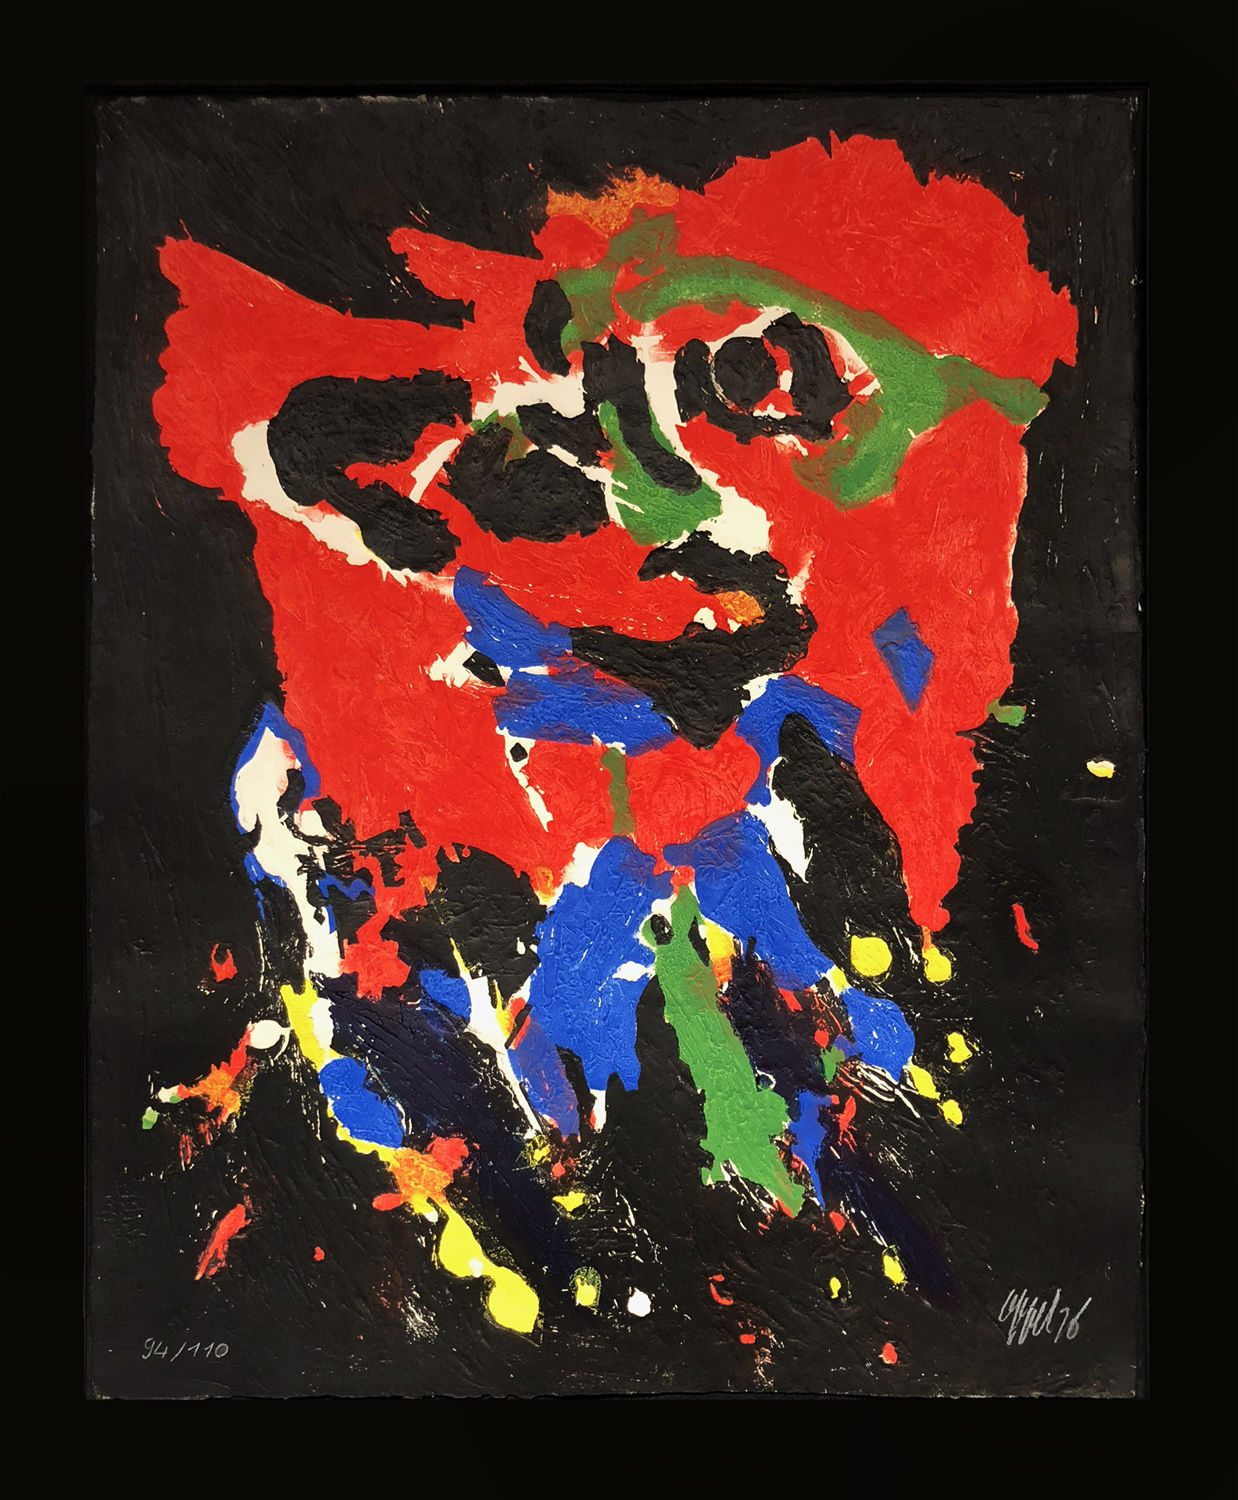 Karel Appel print with colorful abstracted figure on black background